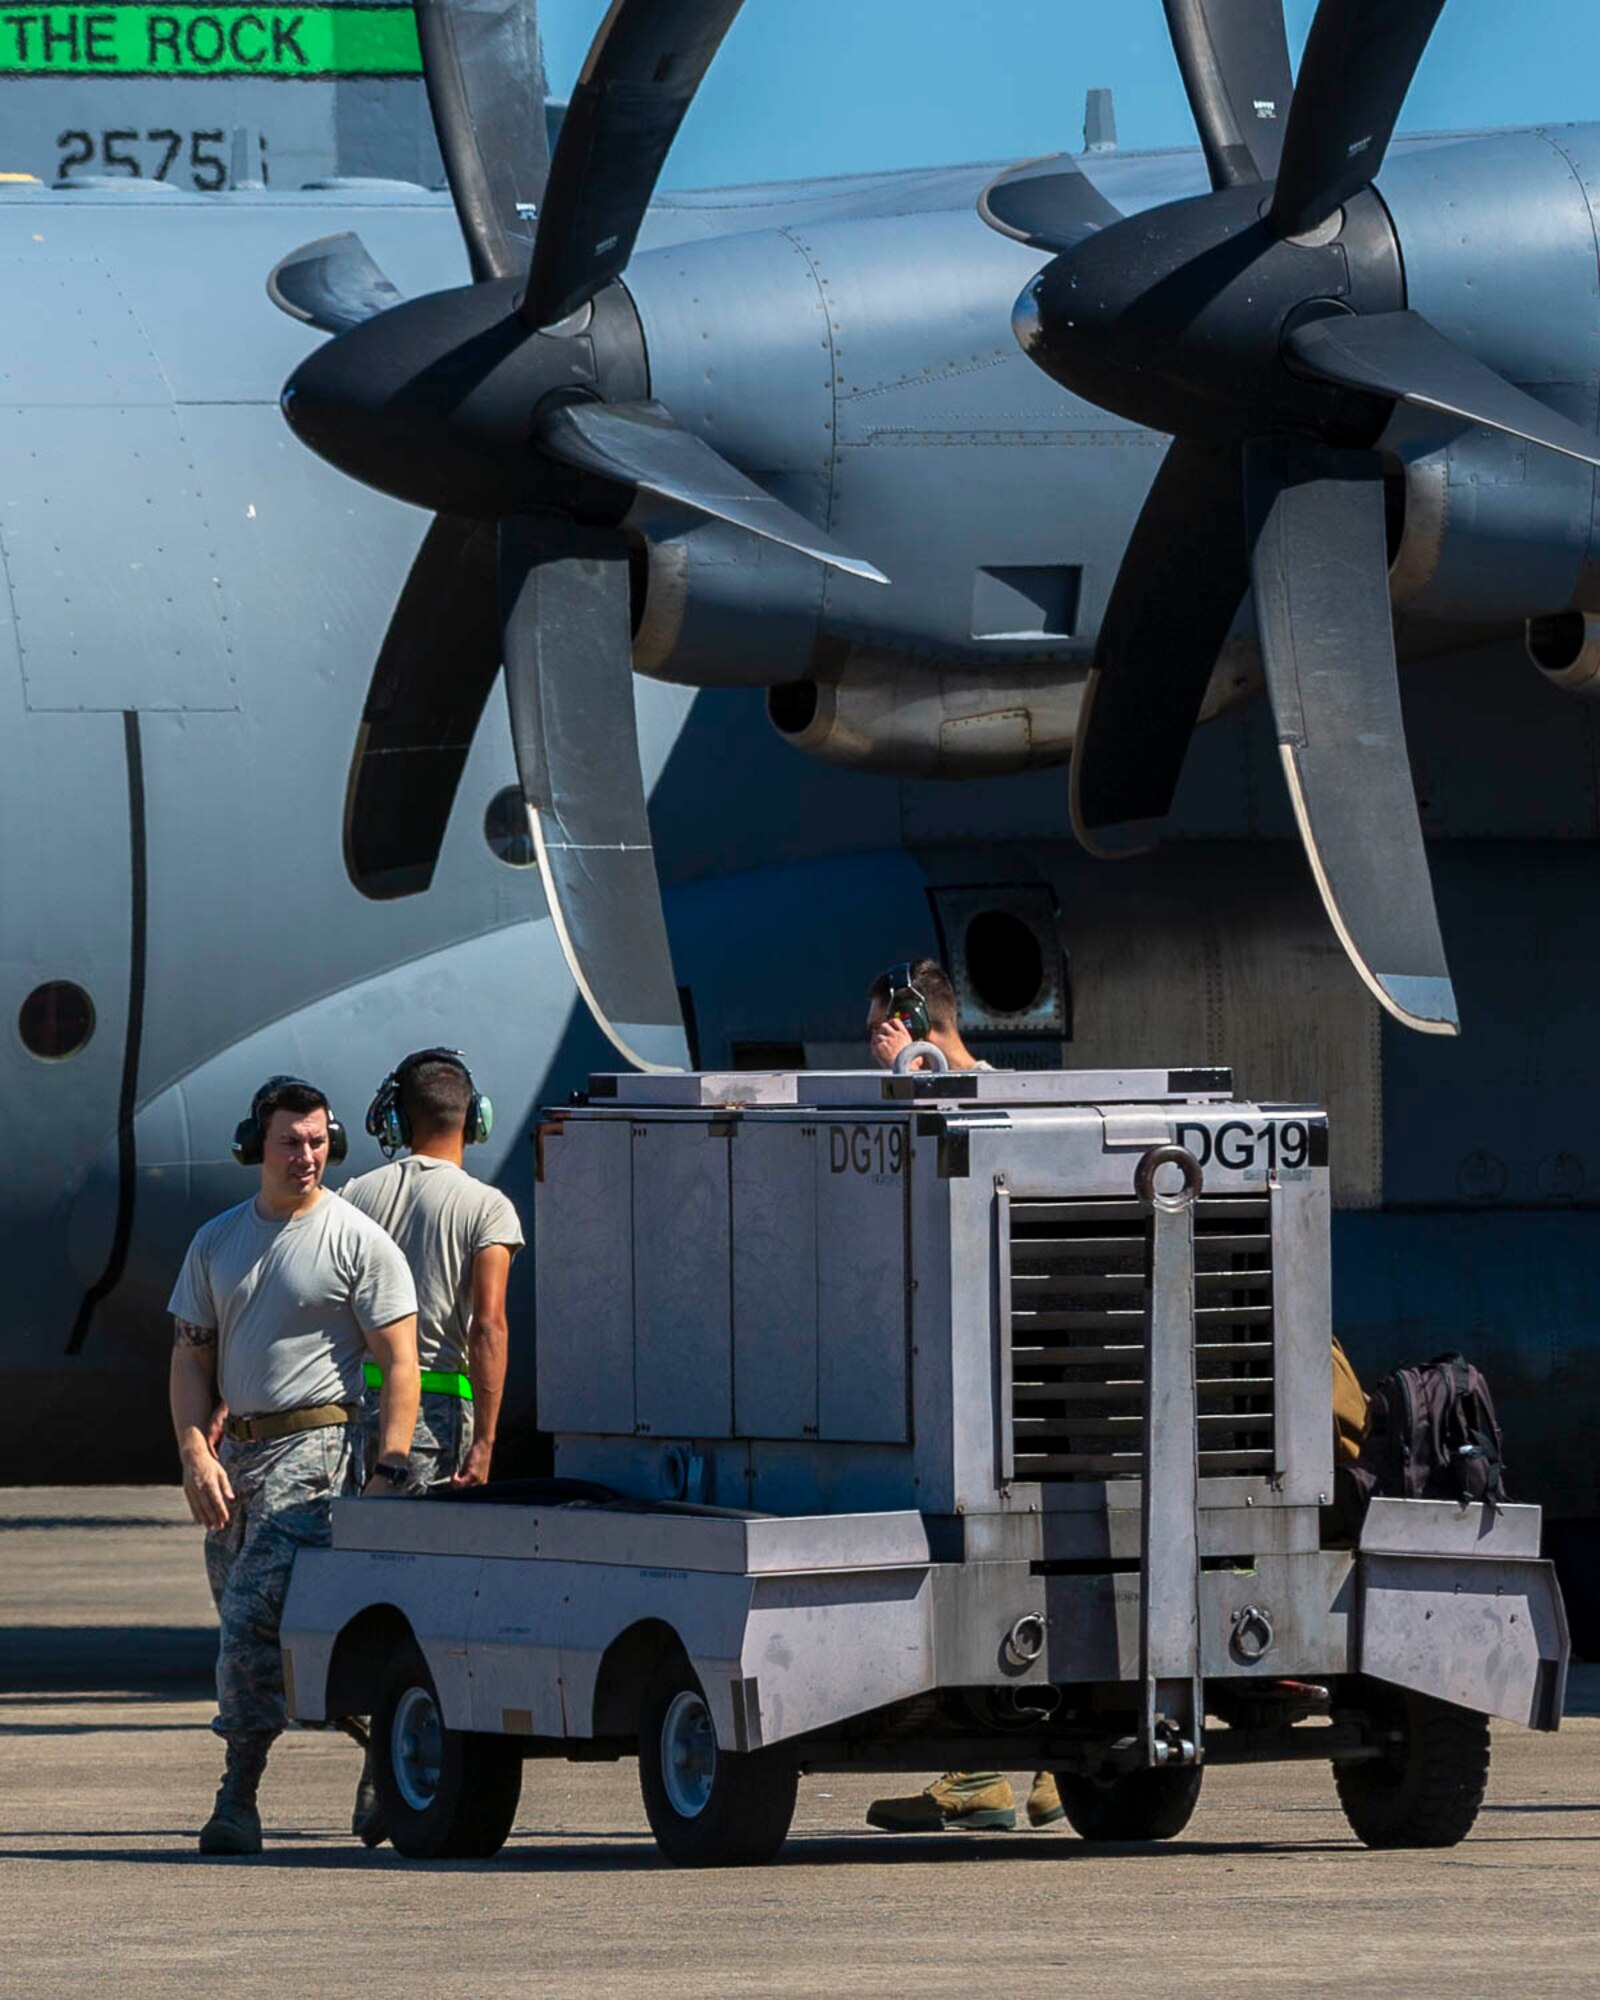 Air Force Reserve Airmen from the 913th Maintenance Squadron work with Team Little Rock personnel to prepare a C-130J Hercules for takeoff on August 15, 2019, at Little Rock Air Force Base, Ark. There are a multitude of maintenance career fields collaborating to certify the aircraft are safe and ready to meet training and operation requirements. The 913th Airlift Group was first assembled in July 2014 as a classic association with the 19th Airlift Wing. Since then, we have leveraged on our Total Force partners to hone our combat airlift tactics. (U.S. Air Force Reserve photo by Maj. Ashley Walker)